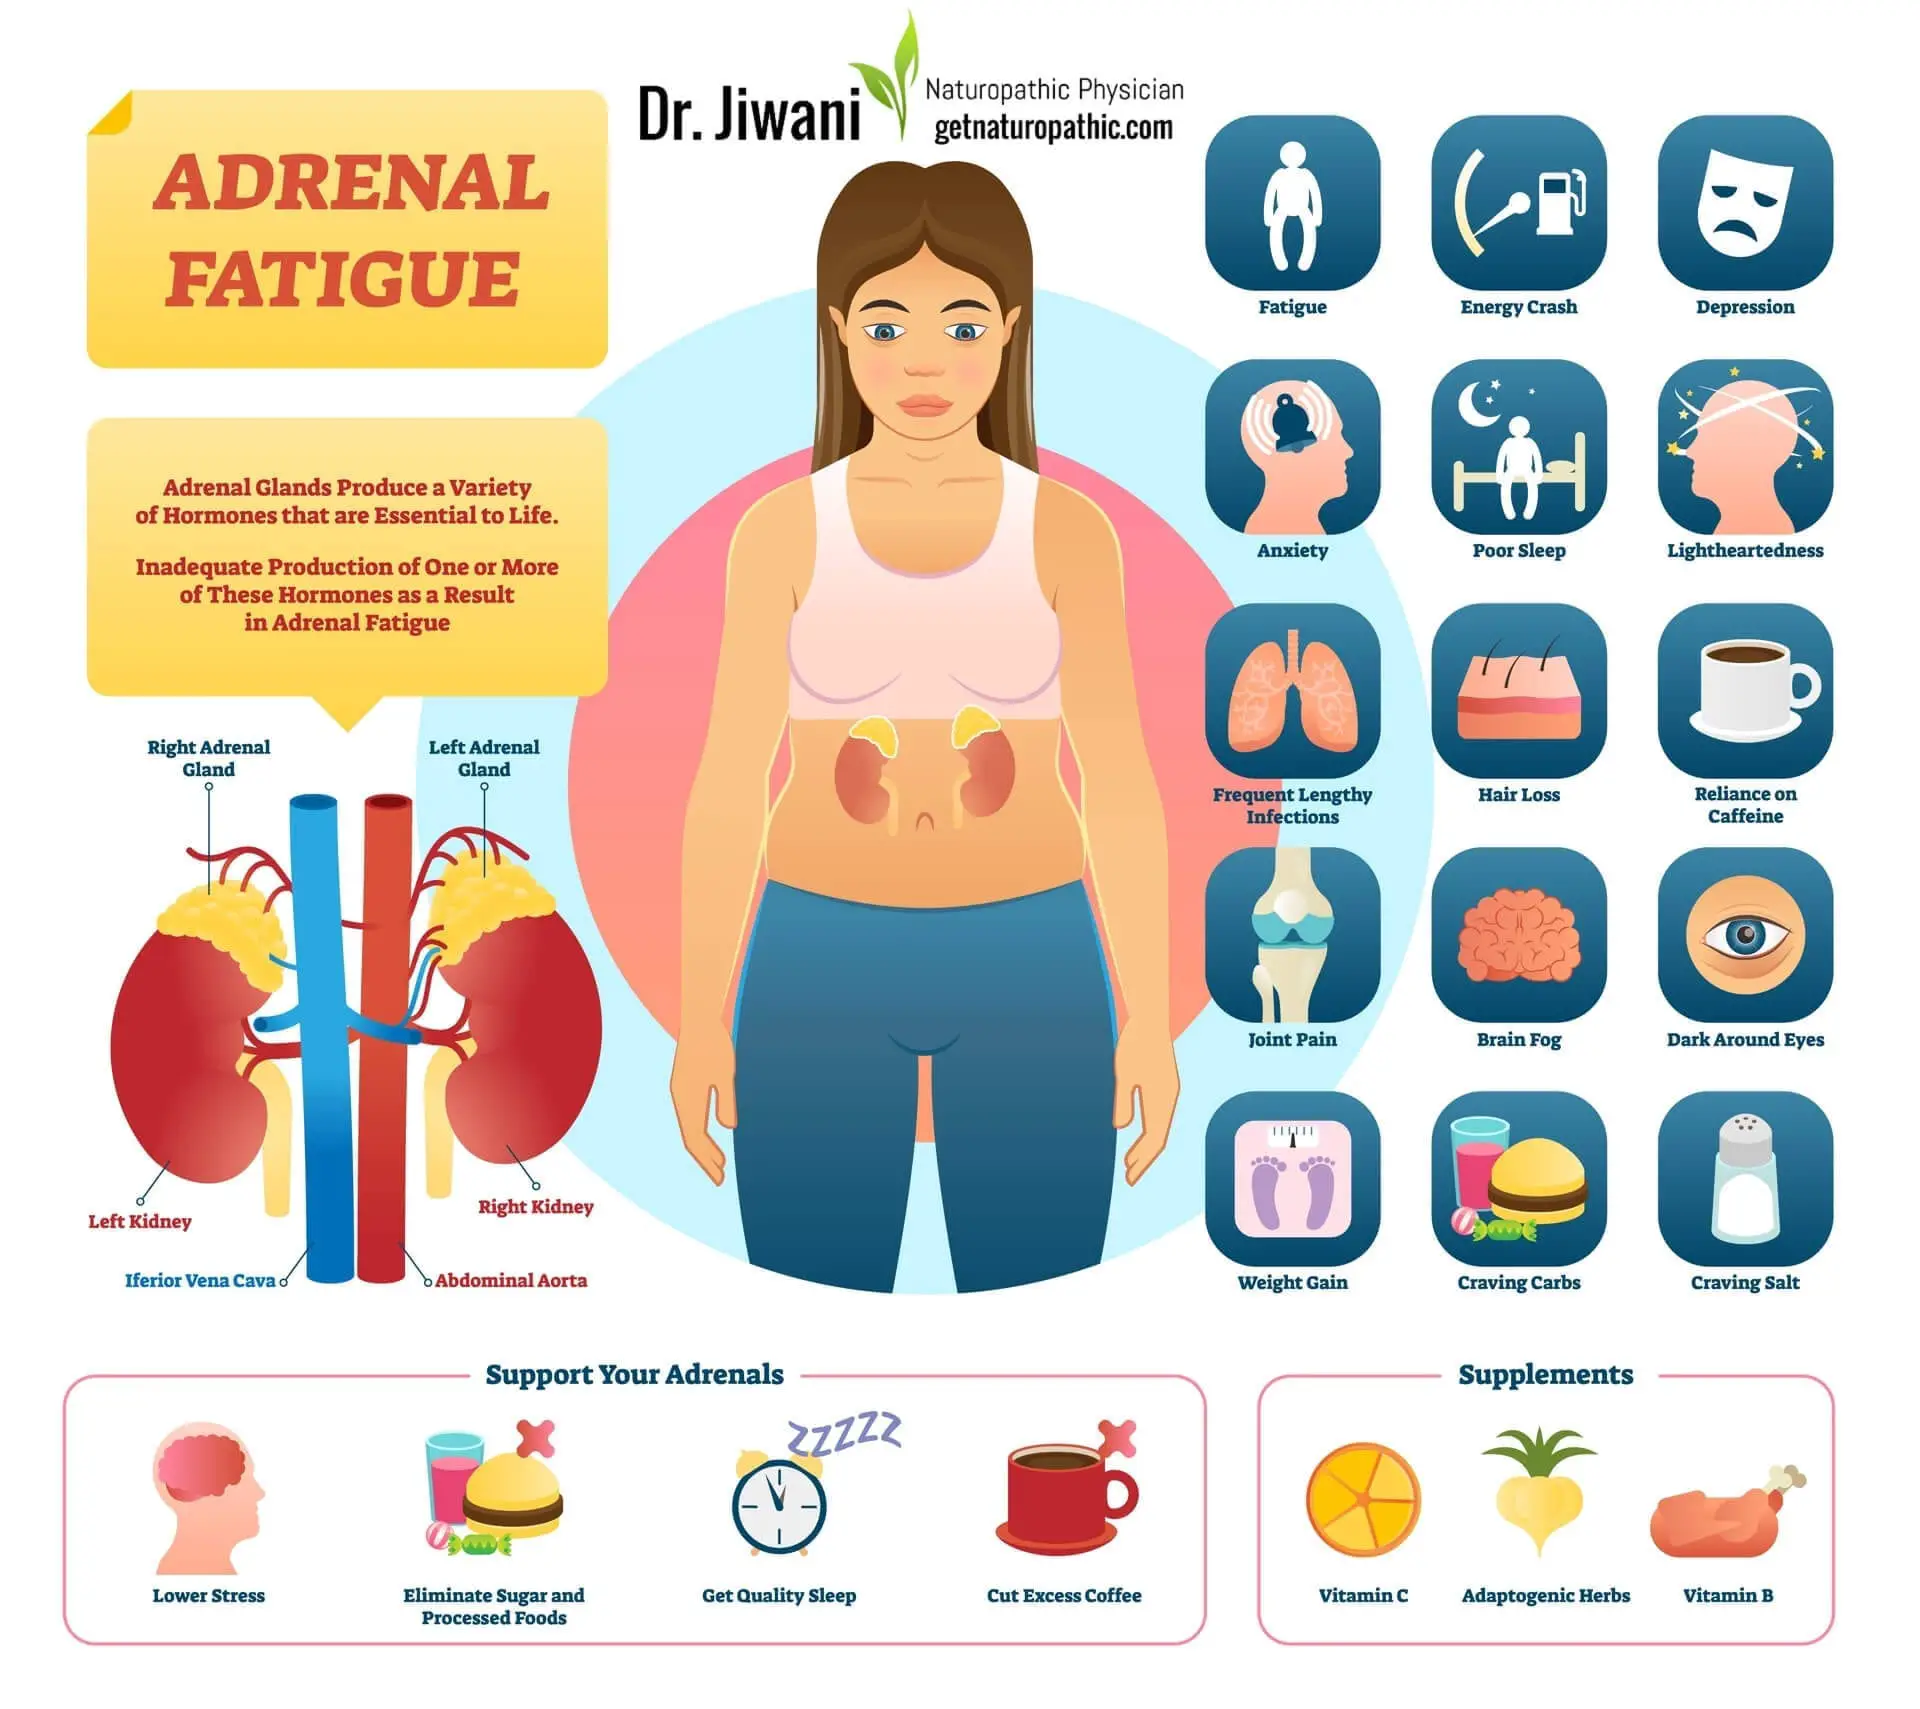 Adrenal Fatigue: When Youâre Too Tired to Enjoy Life!